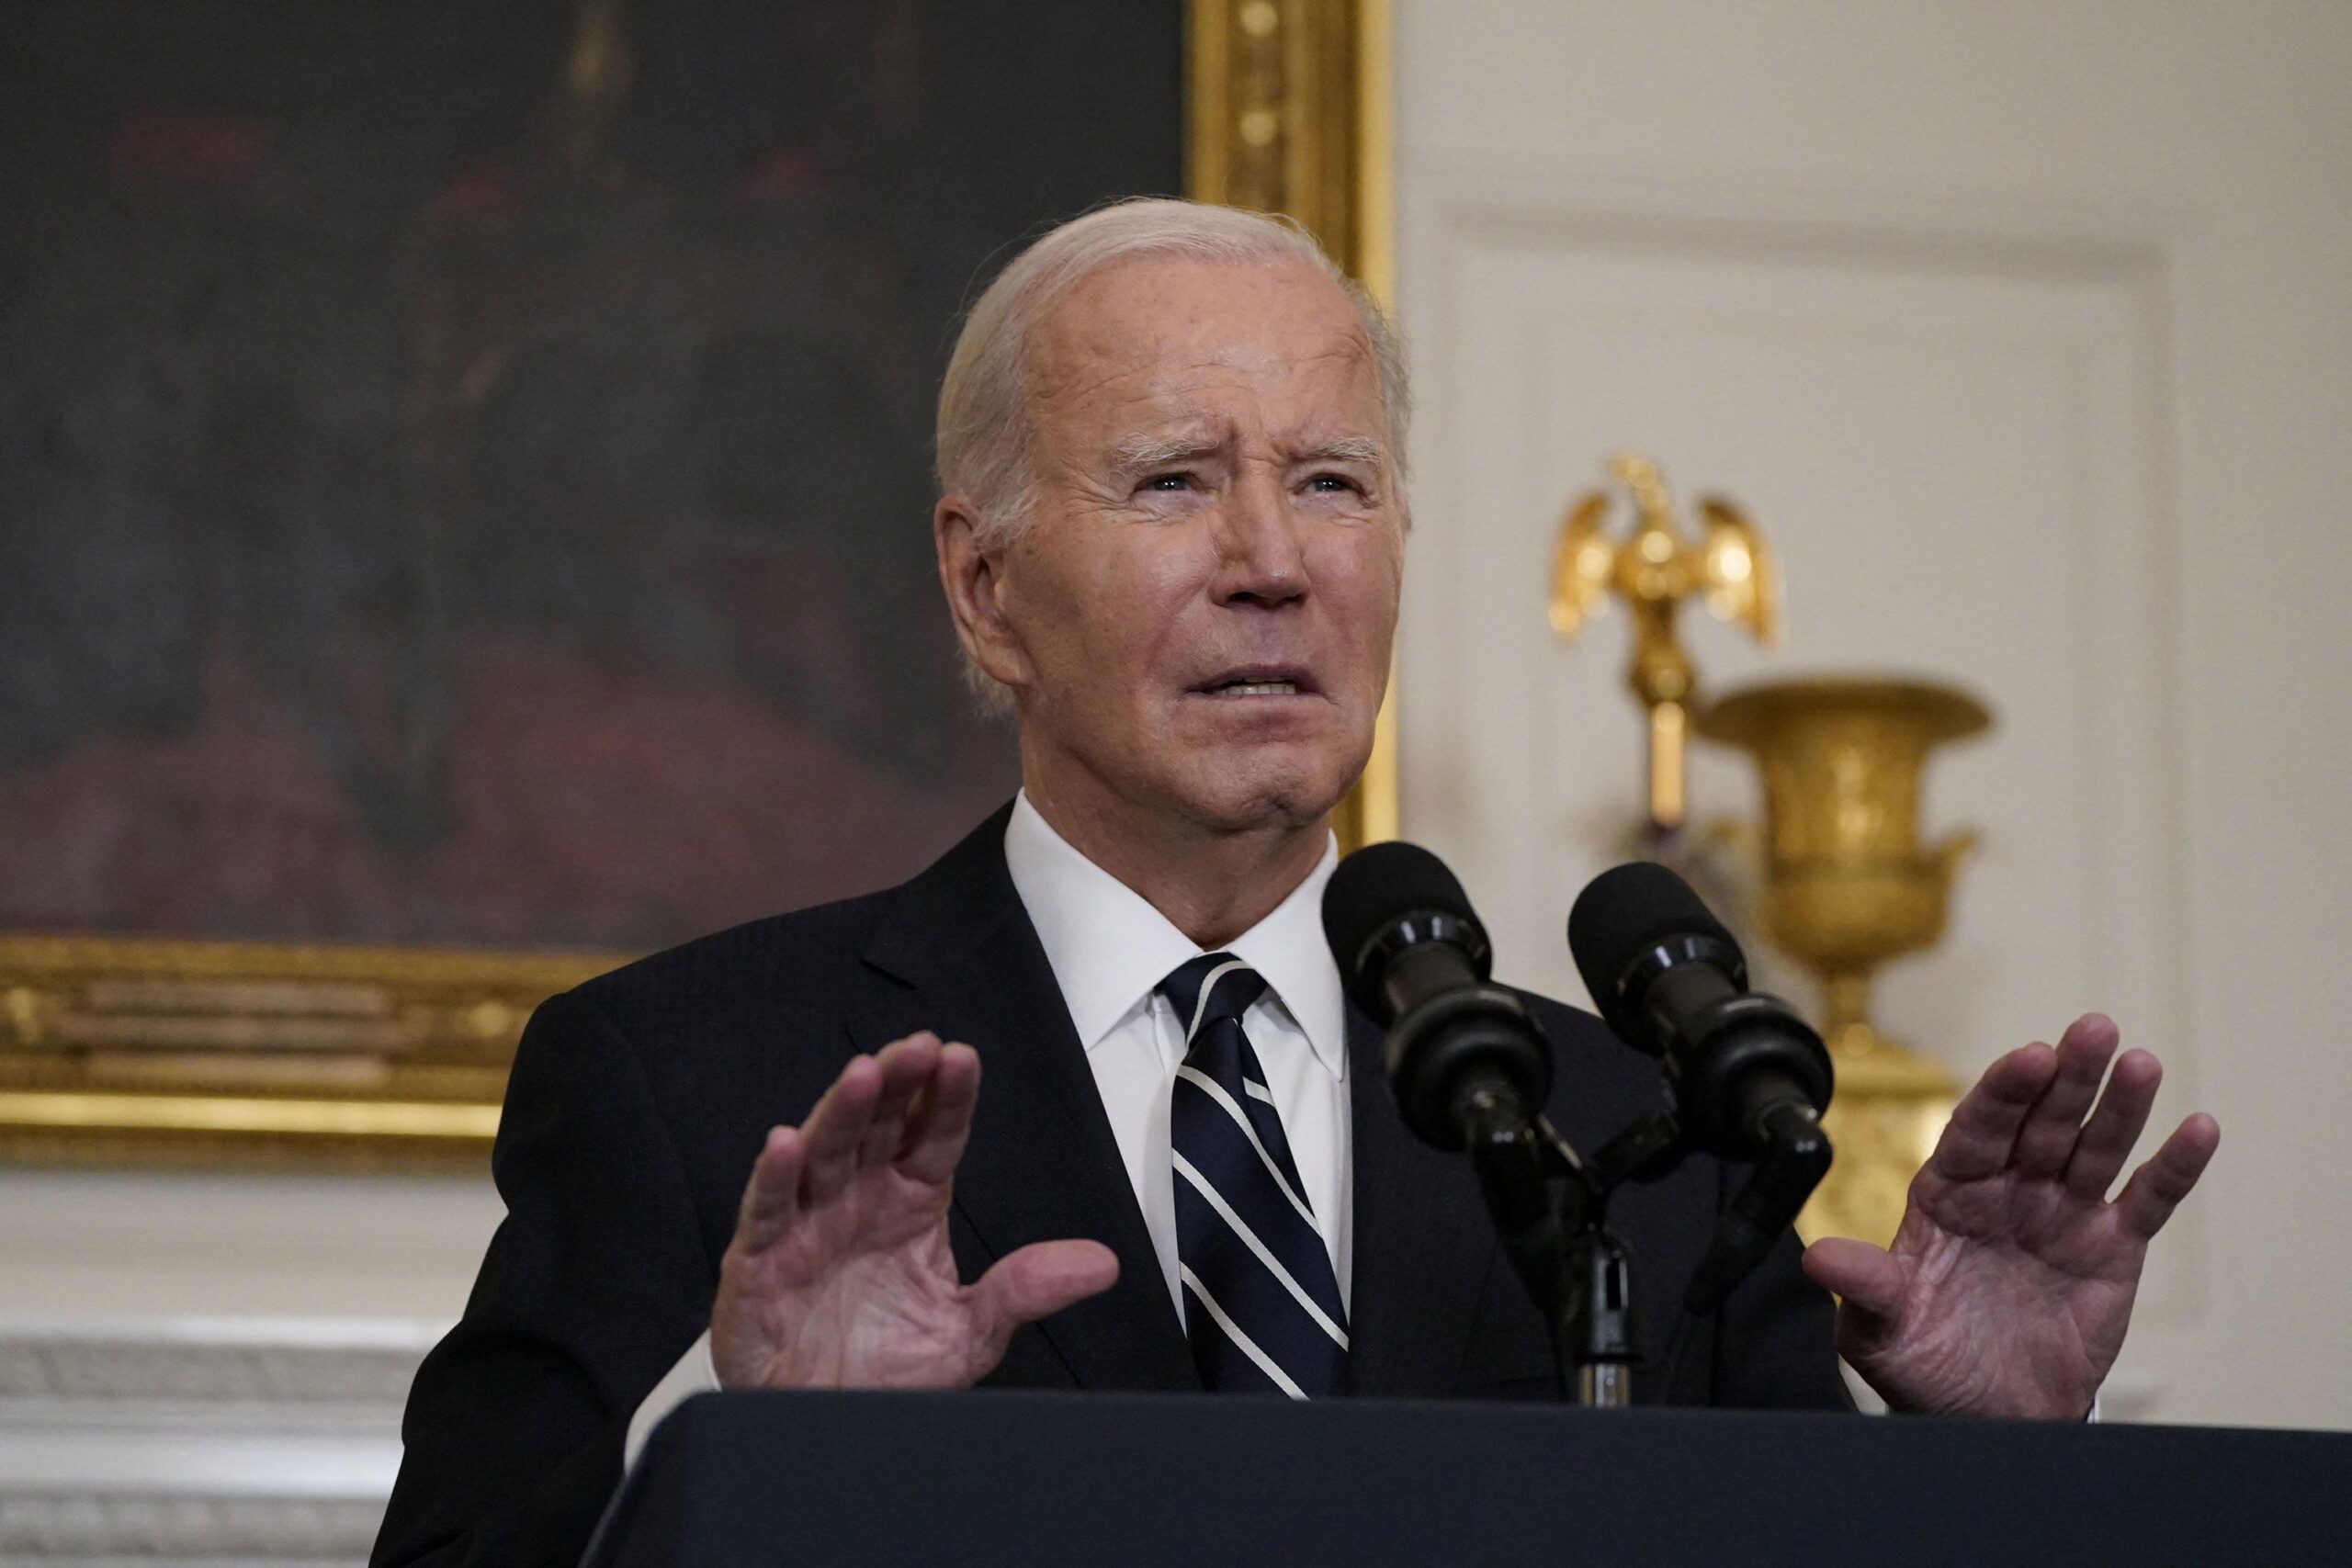 Biden Confronts Xi: Human Rights and Detained Americans in the Spotlight